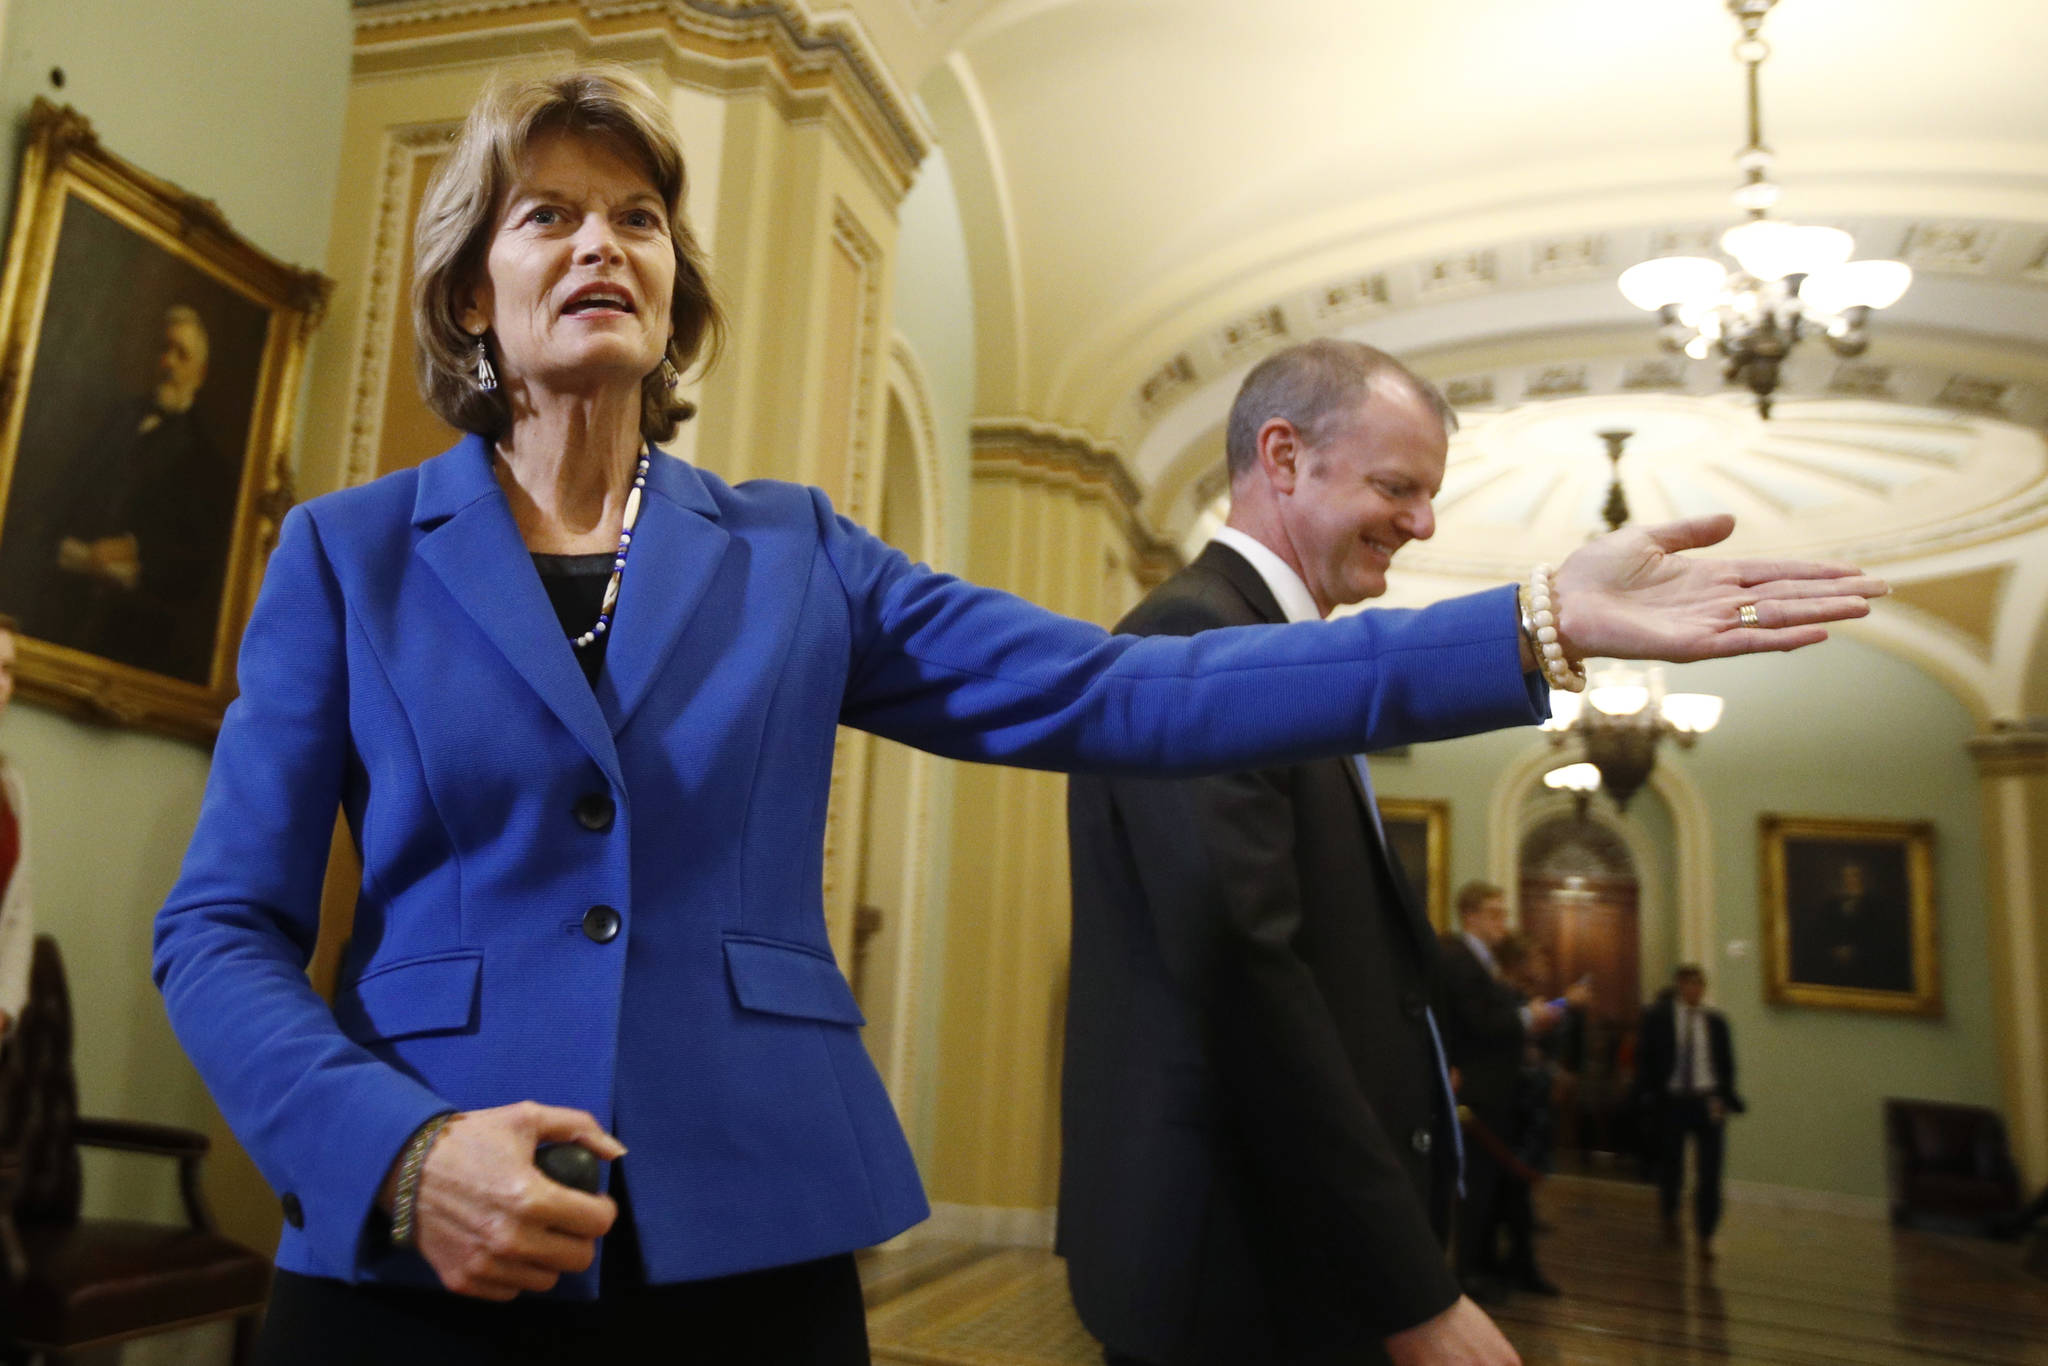 Sen. Lisa Murkowski, R-Alaska, gestures as she leaves the Senate chamber after the vote on witnesses during the impeachment trial of President Donald Trump at the U.S. Capitol Friday, Jan. 31 in Washington. The Senate rejected the idea of summoning witnesses for President Donald Trump’s impeachment trial late Friday, all but ensuring his acquittal. (AP Photo | Steve Helber)